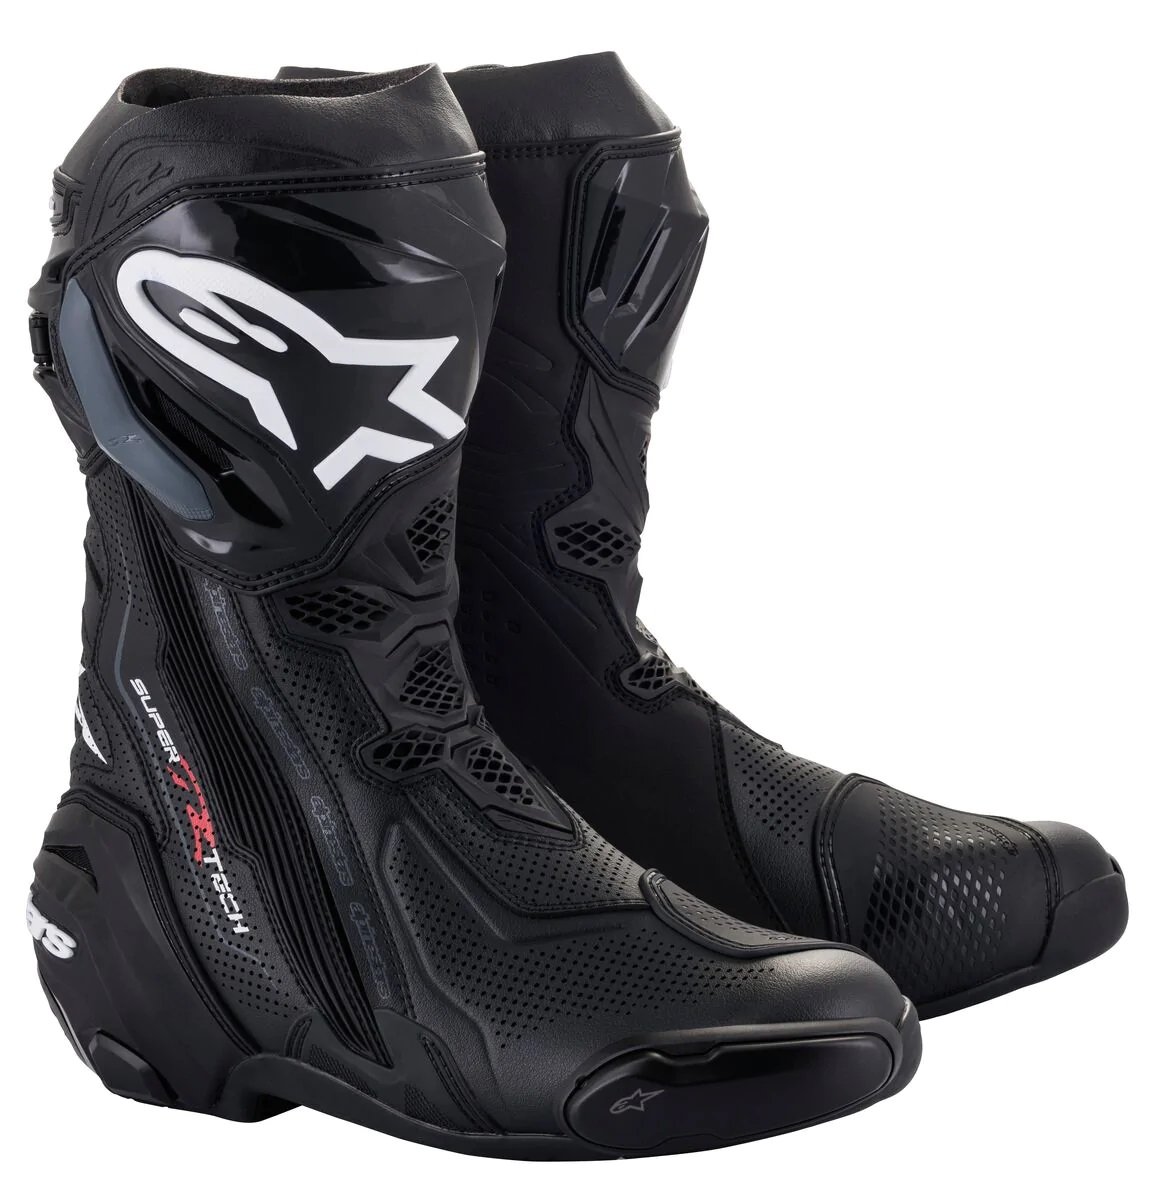 Image of Alpinestars Supertech R Vented Black Boots Size 46 ID 8059175376665